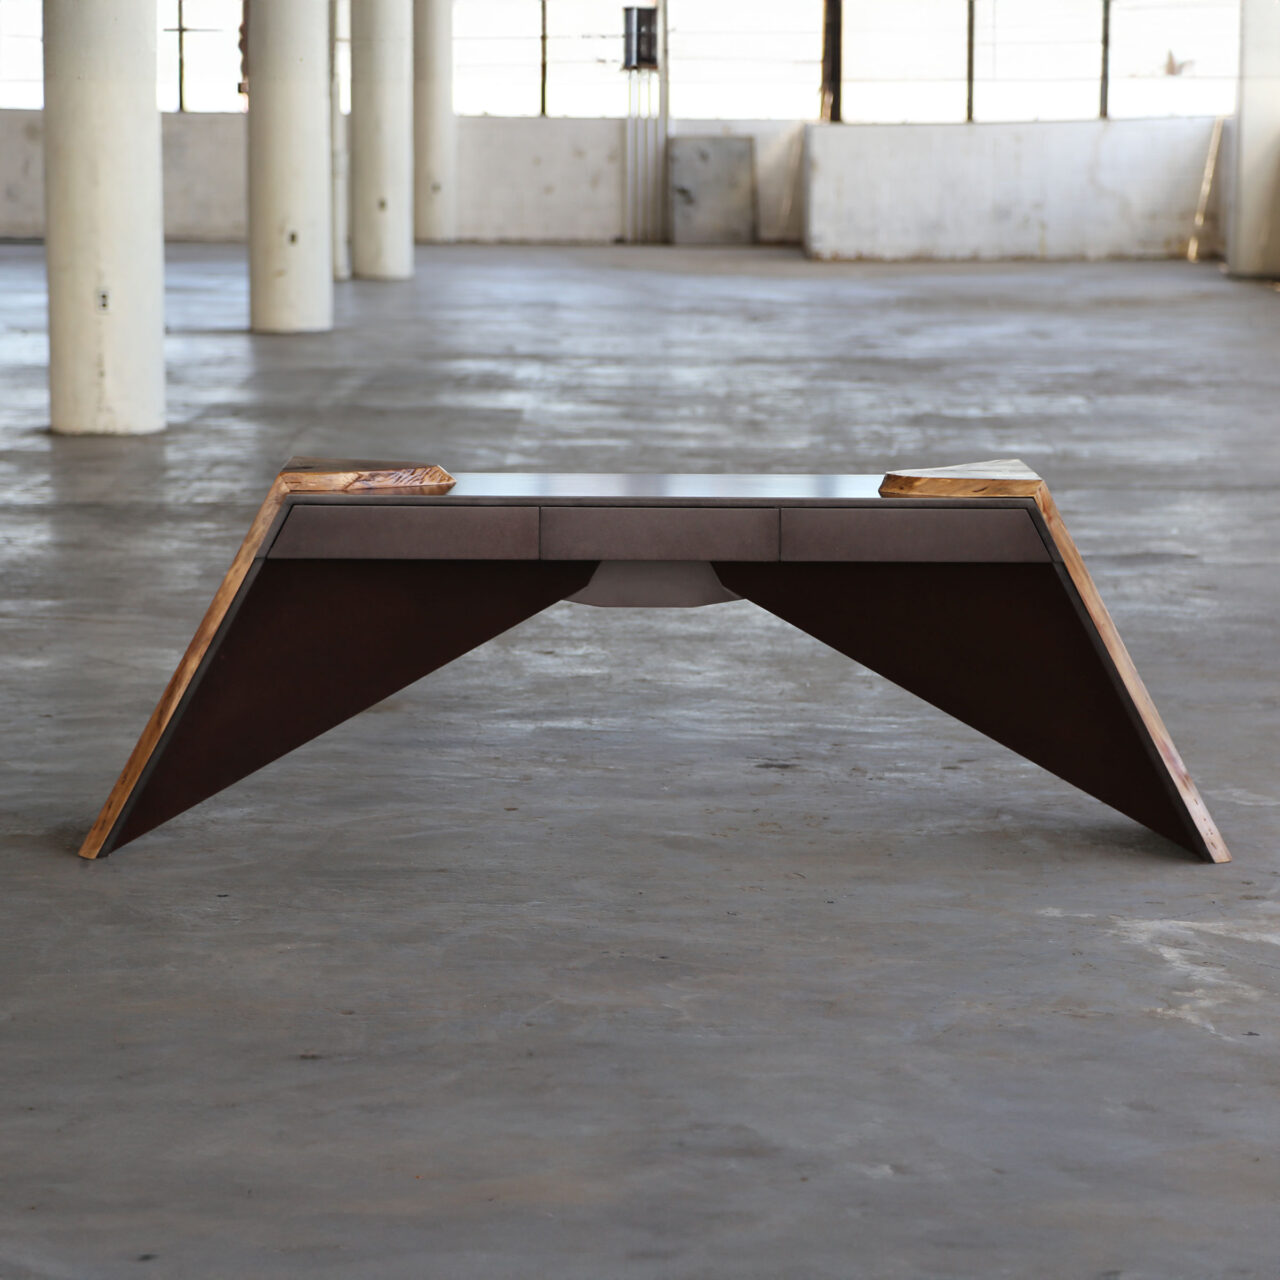 The 'Time When Console' by SENTIENT Furniture, a unique walnut table with angular legs and natural edge details, displayed in a spacious industrial setting.